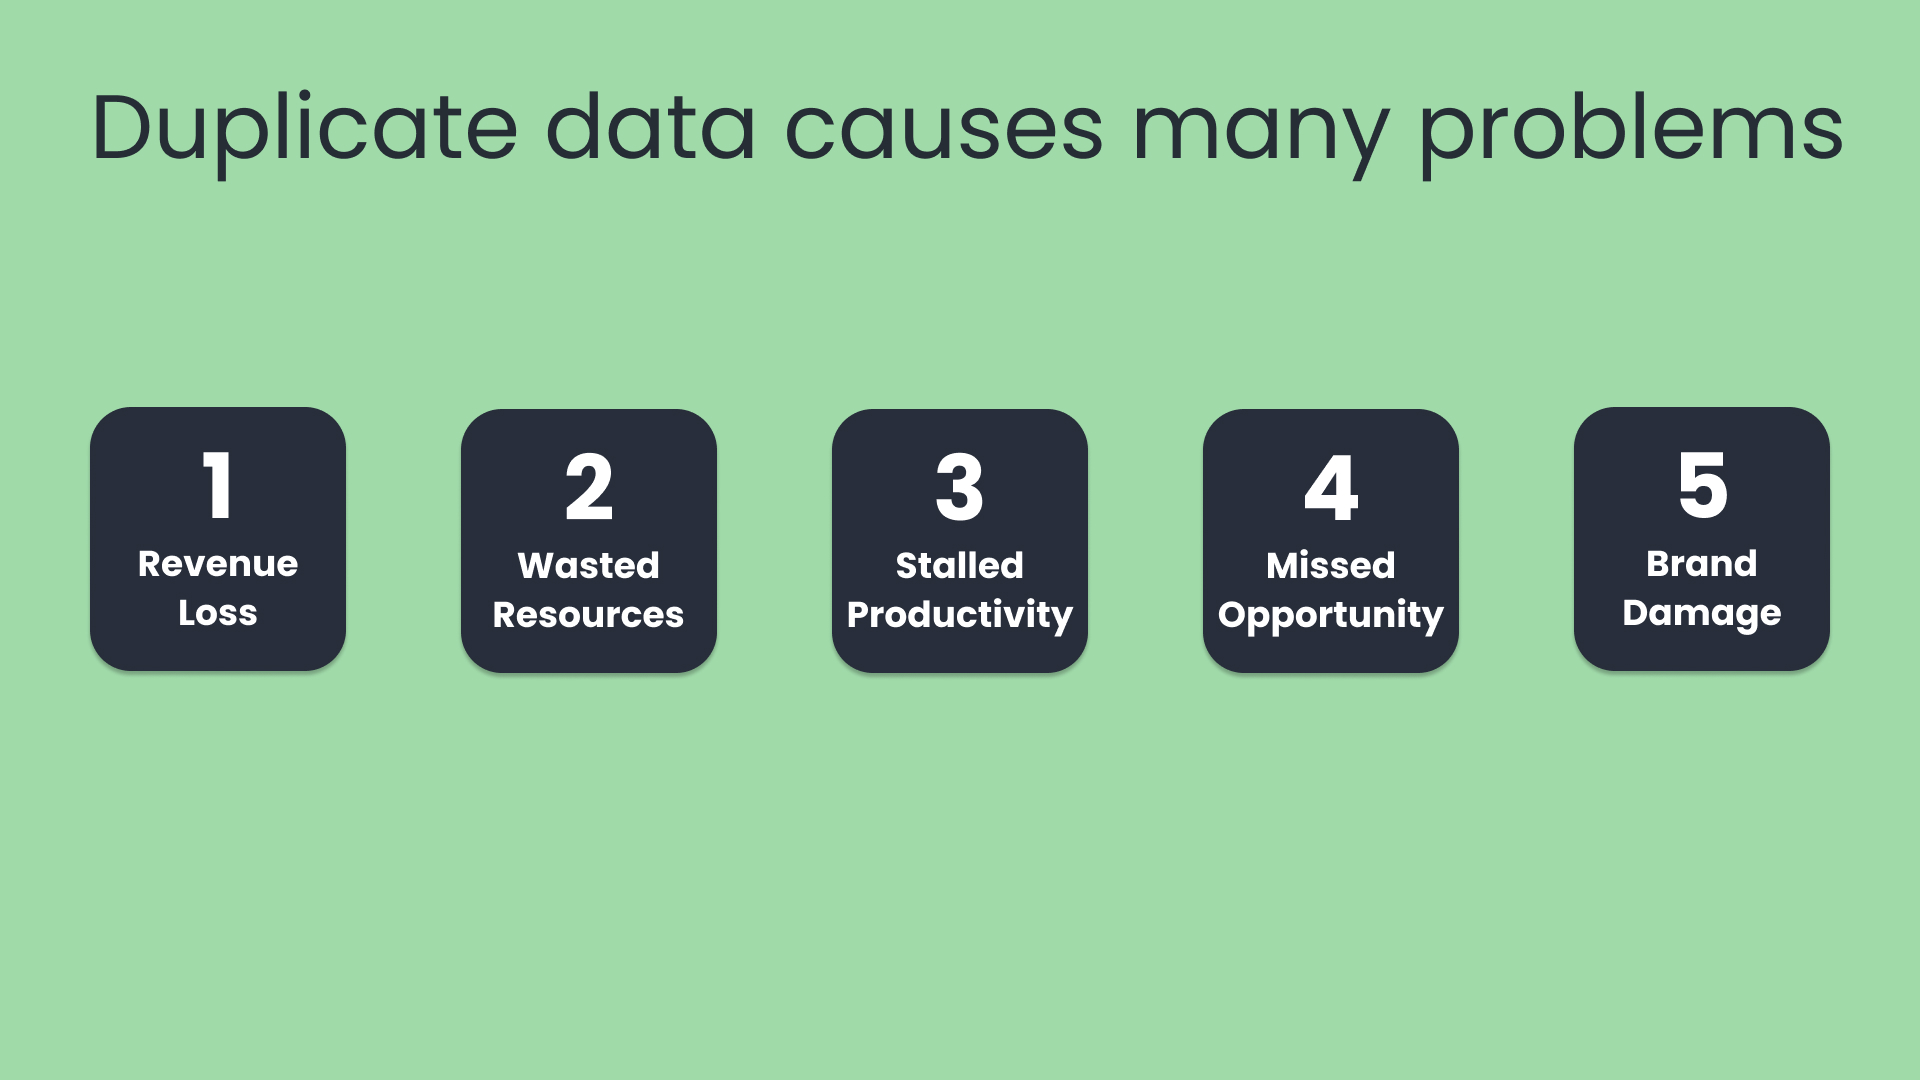 The problems of duplicate data include revenue loss, wasted resources, stalled productivity, missed opportunities and brand damage.